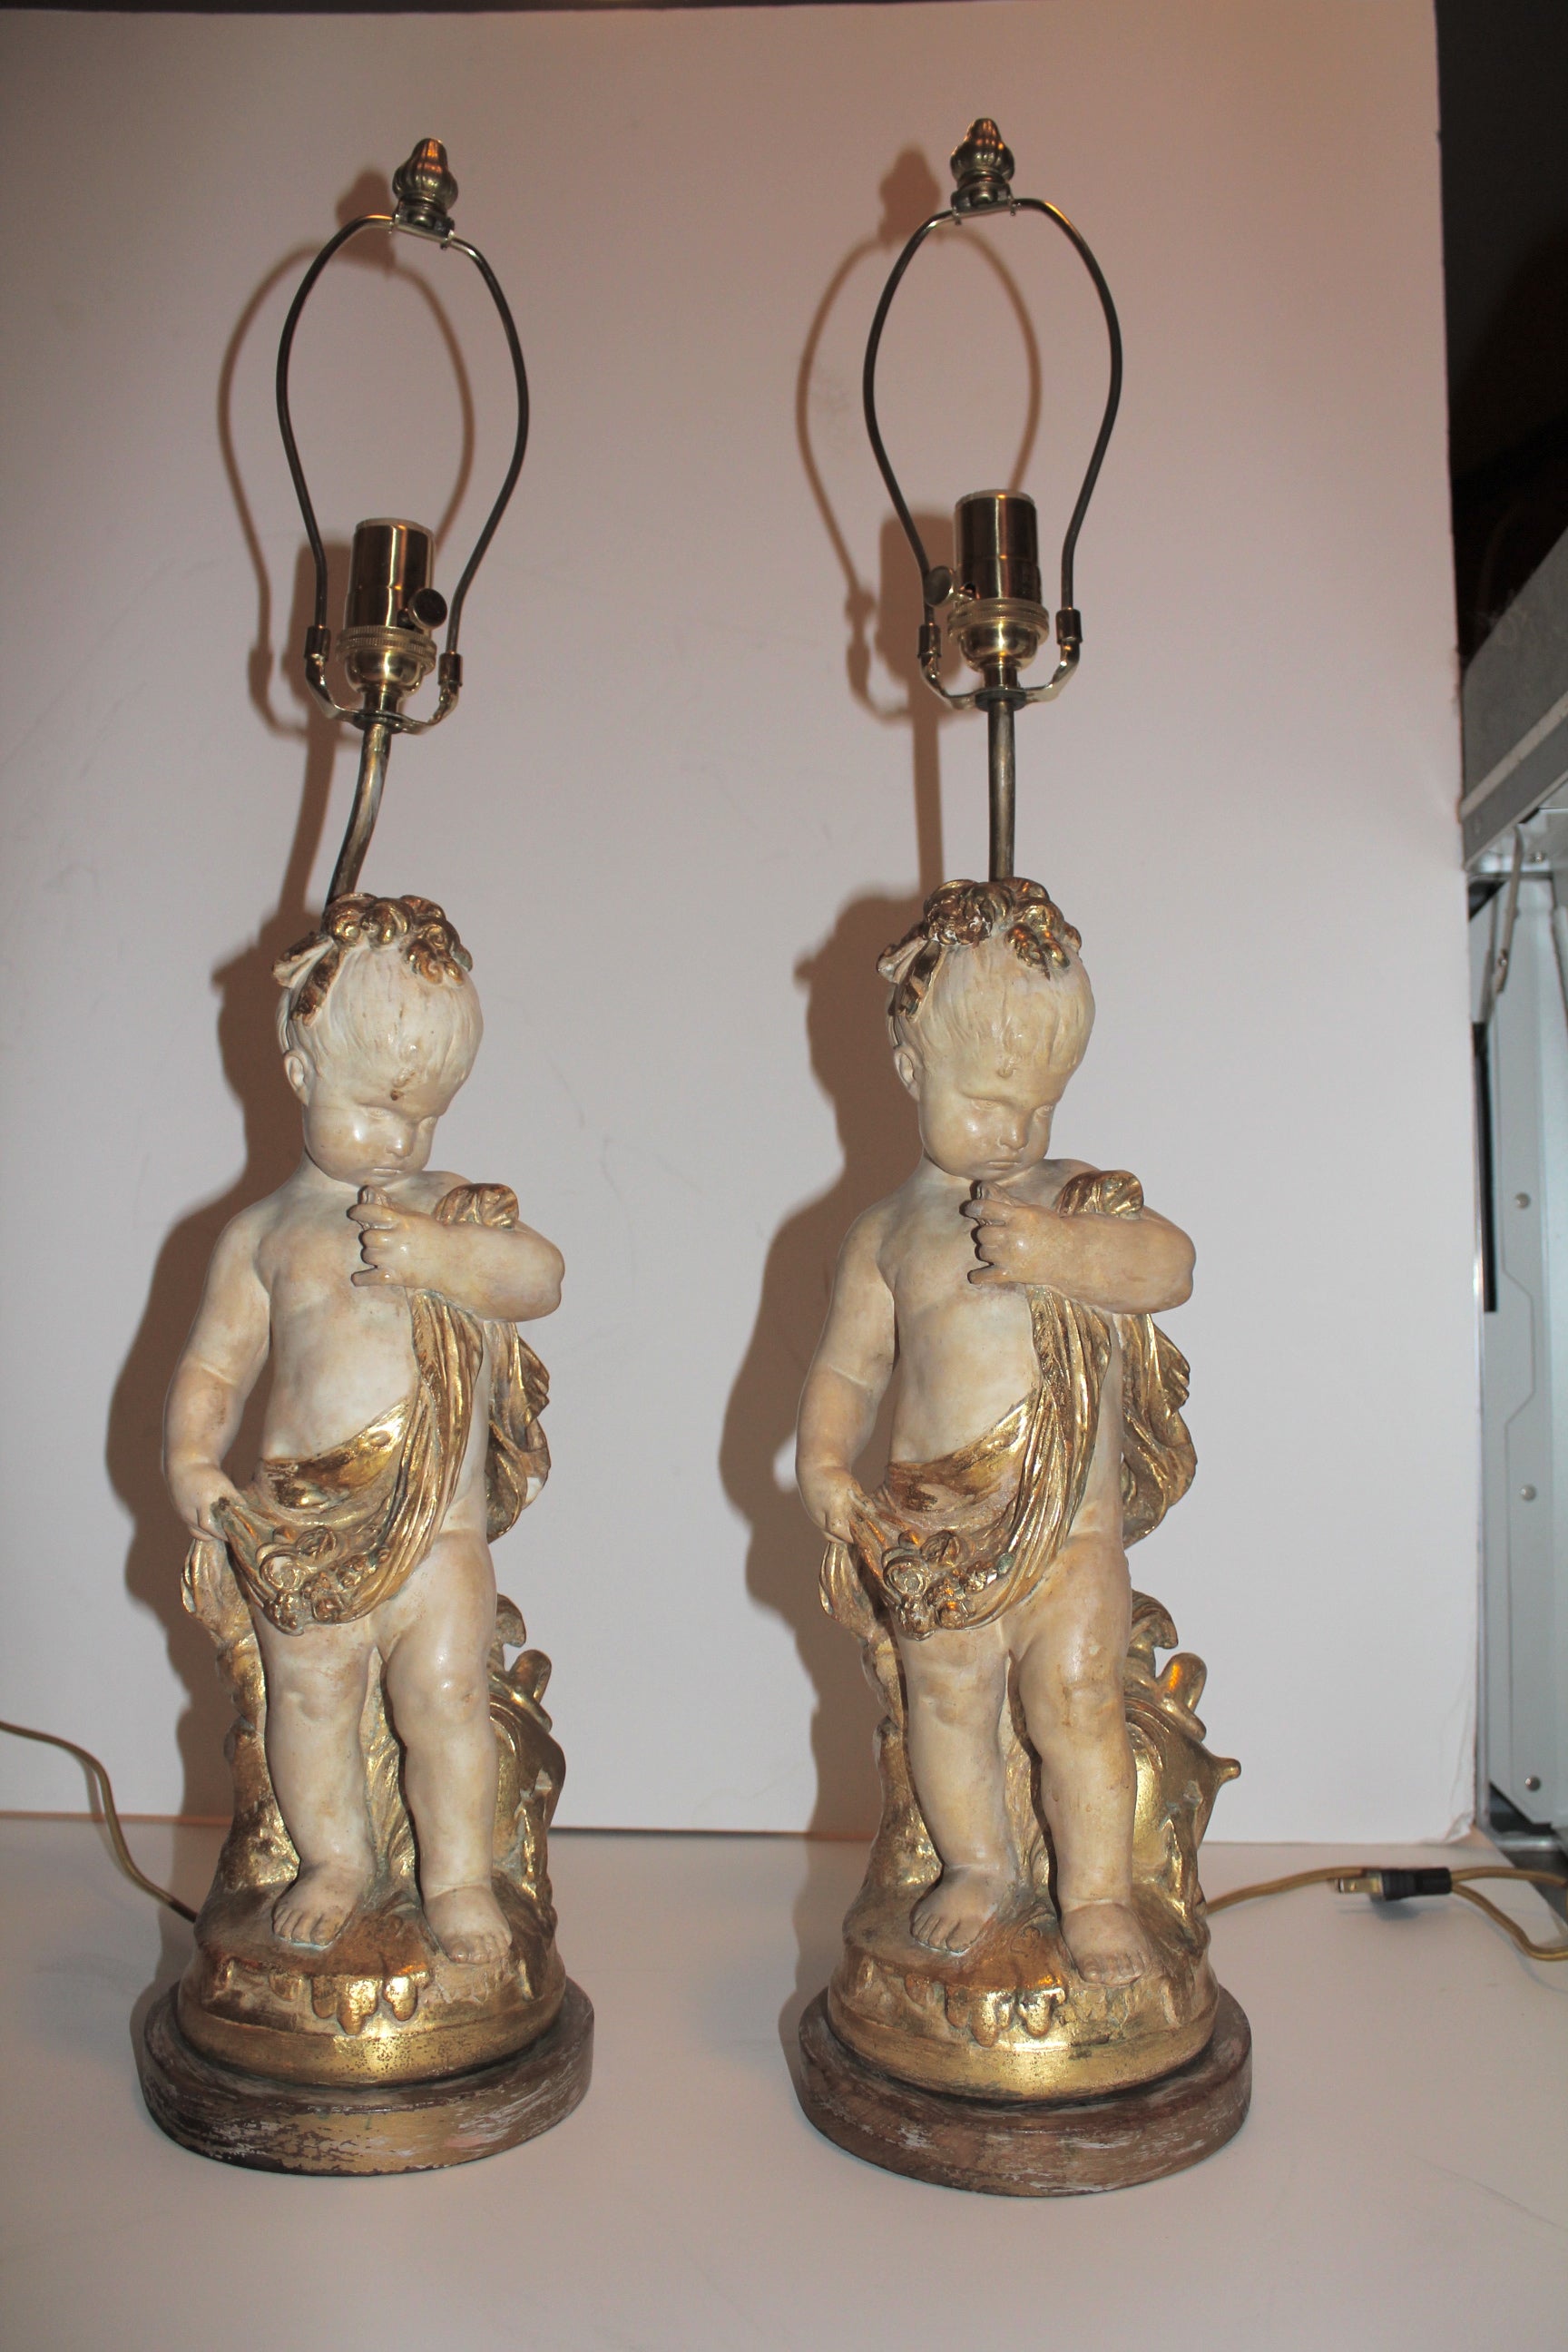 Wonderful Plaster Painted Putti or Cherubs Mounted as Lamps 